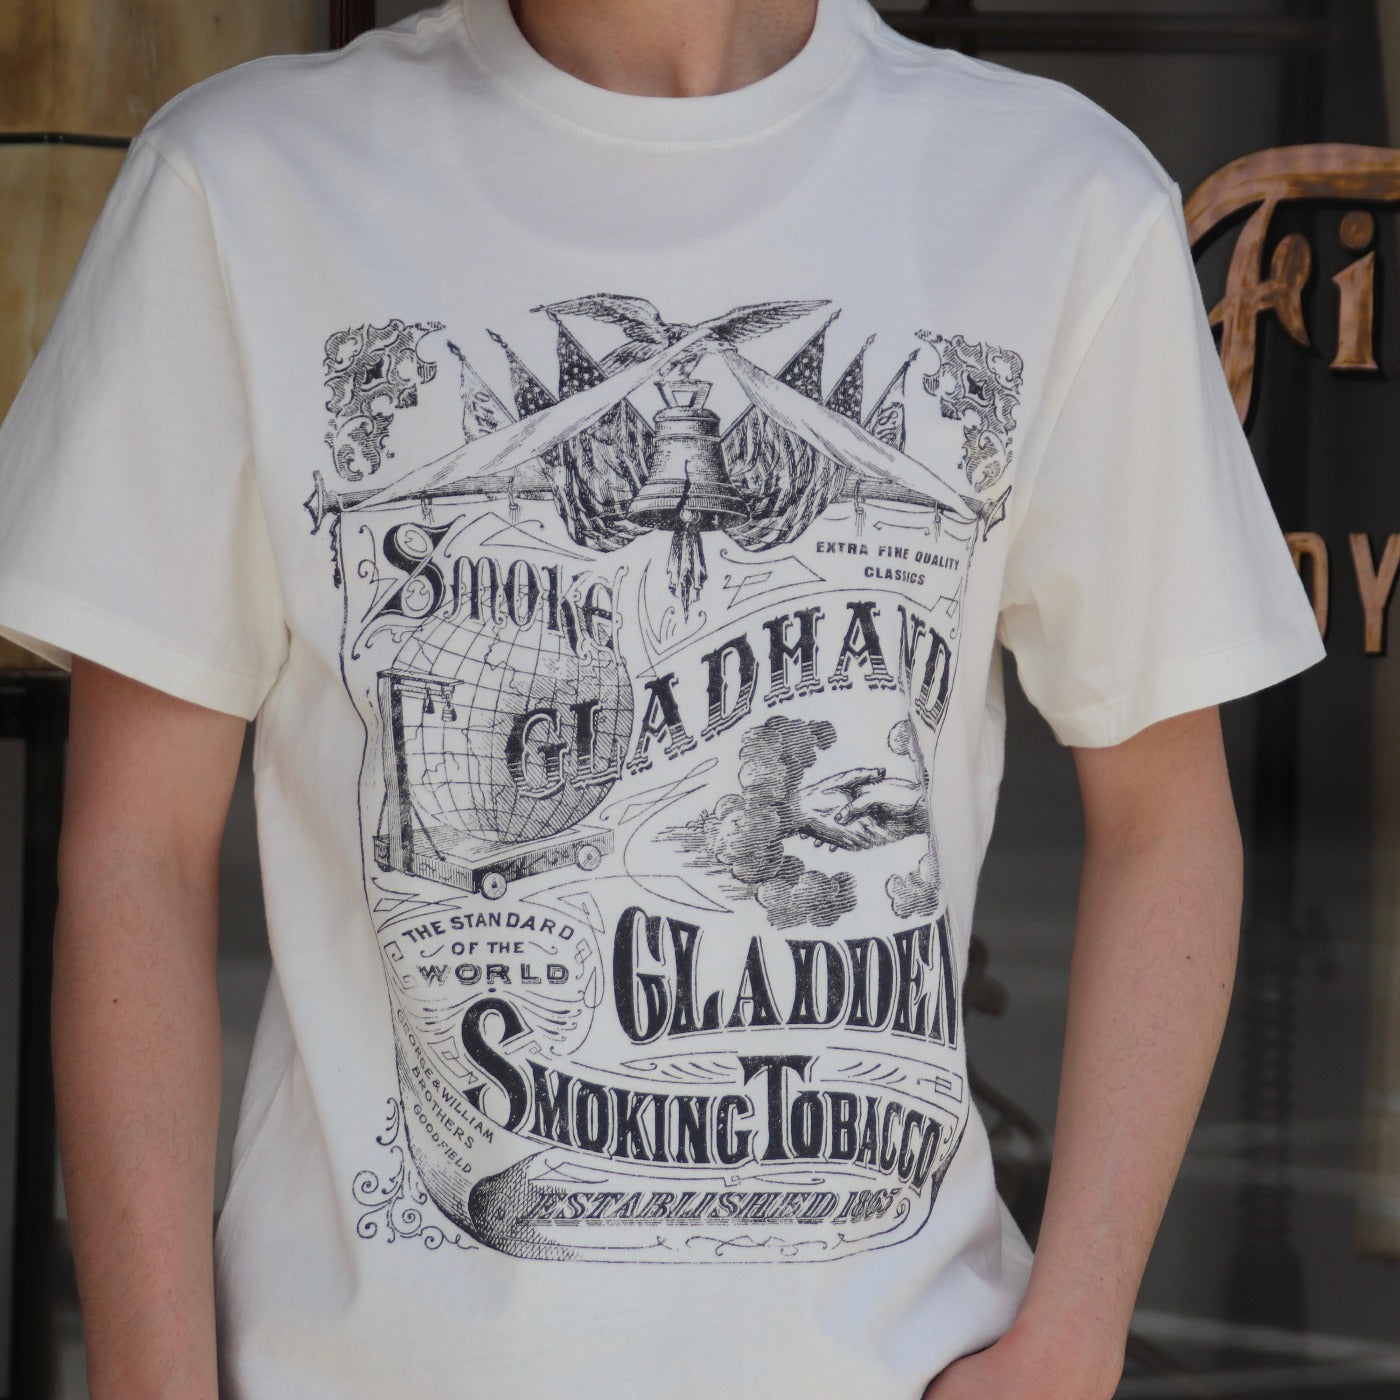 GLADWELL - S/S T-SHIRTS